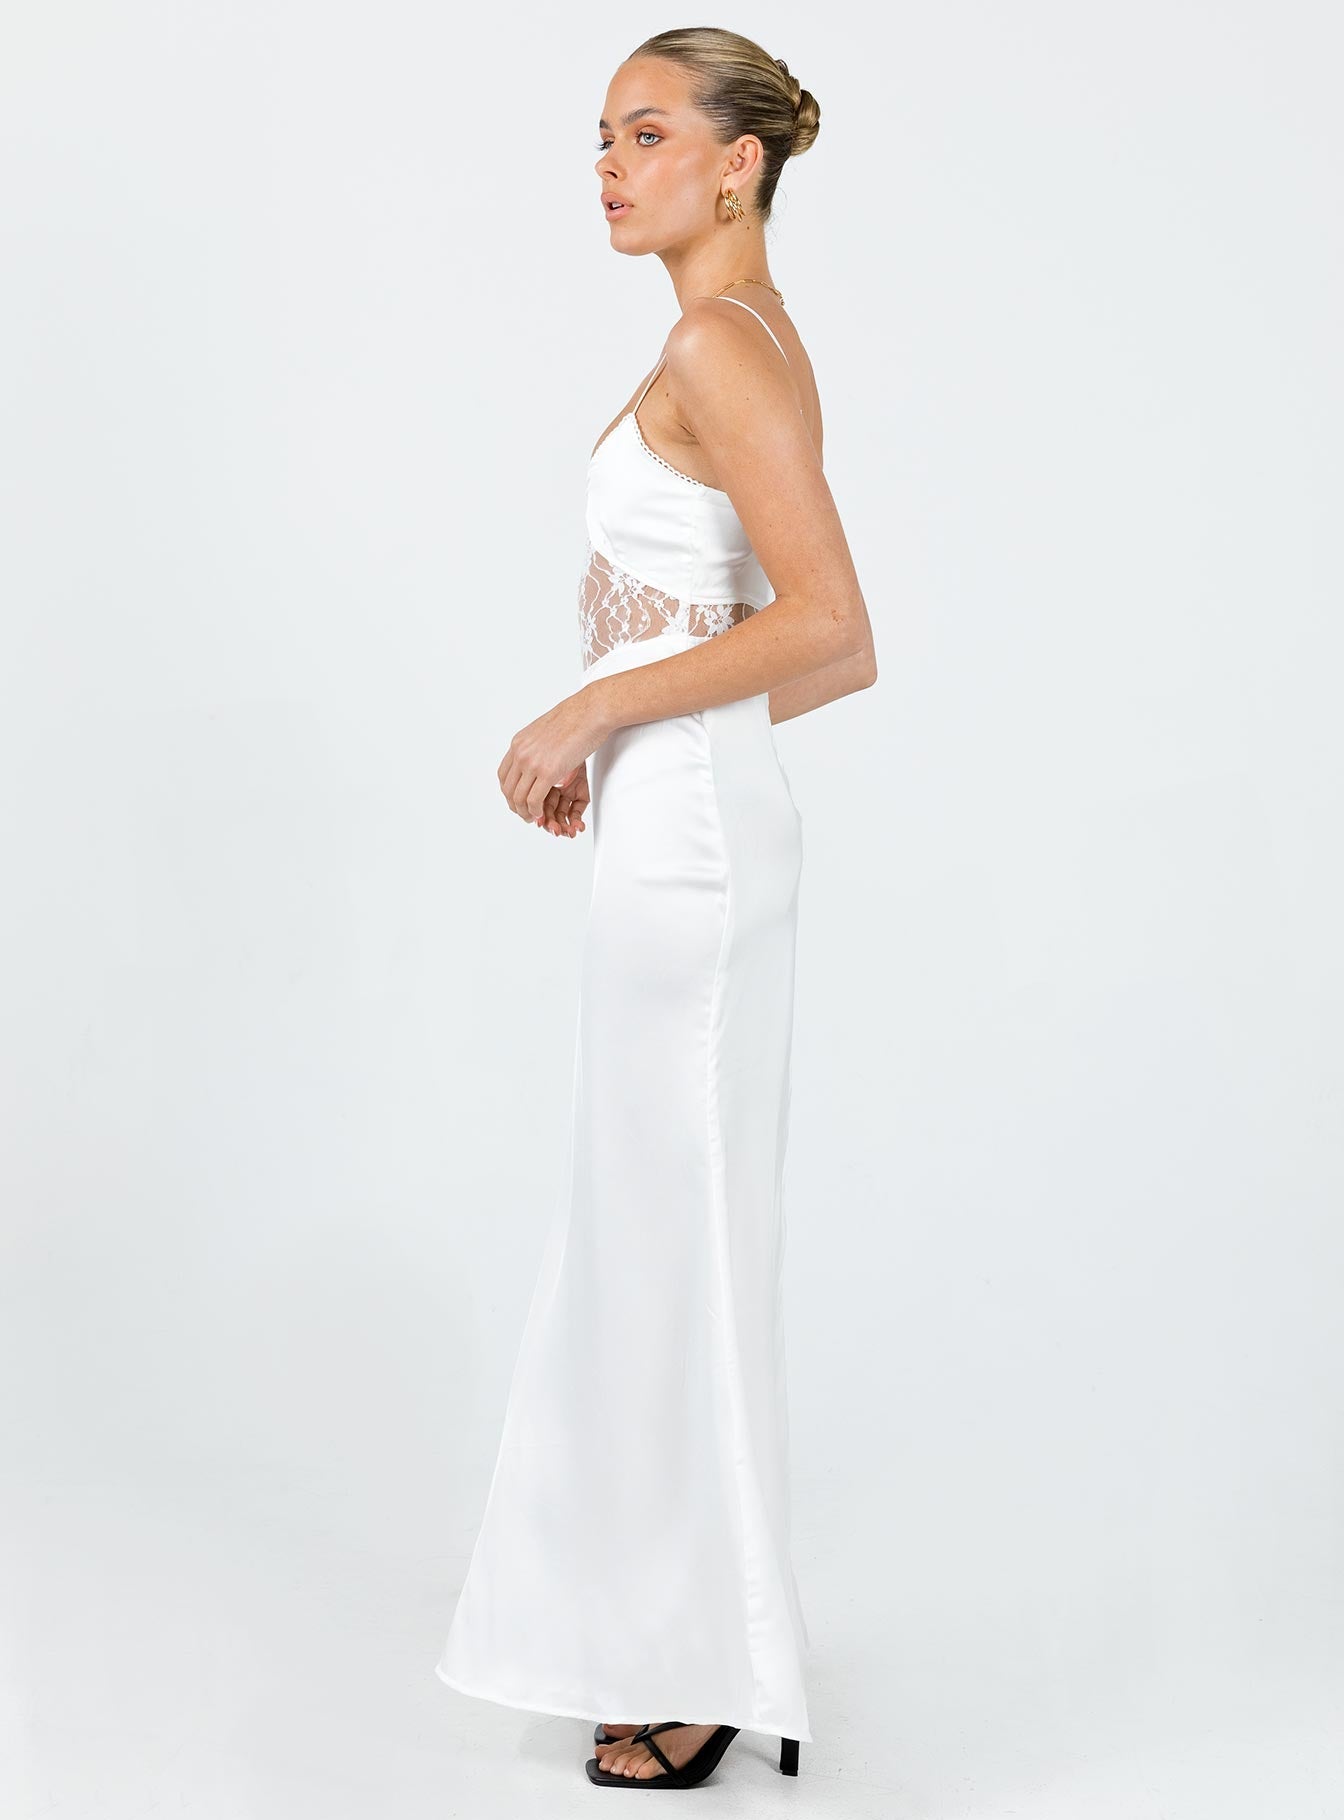 Shop Formal Dress - Roselle Maxi Dress White featured image